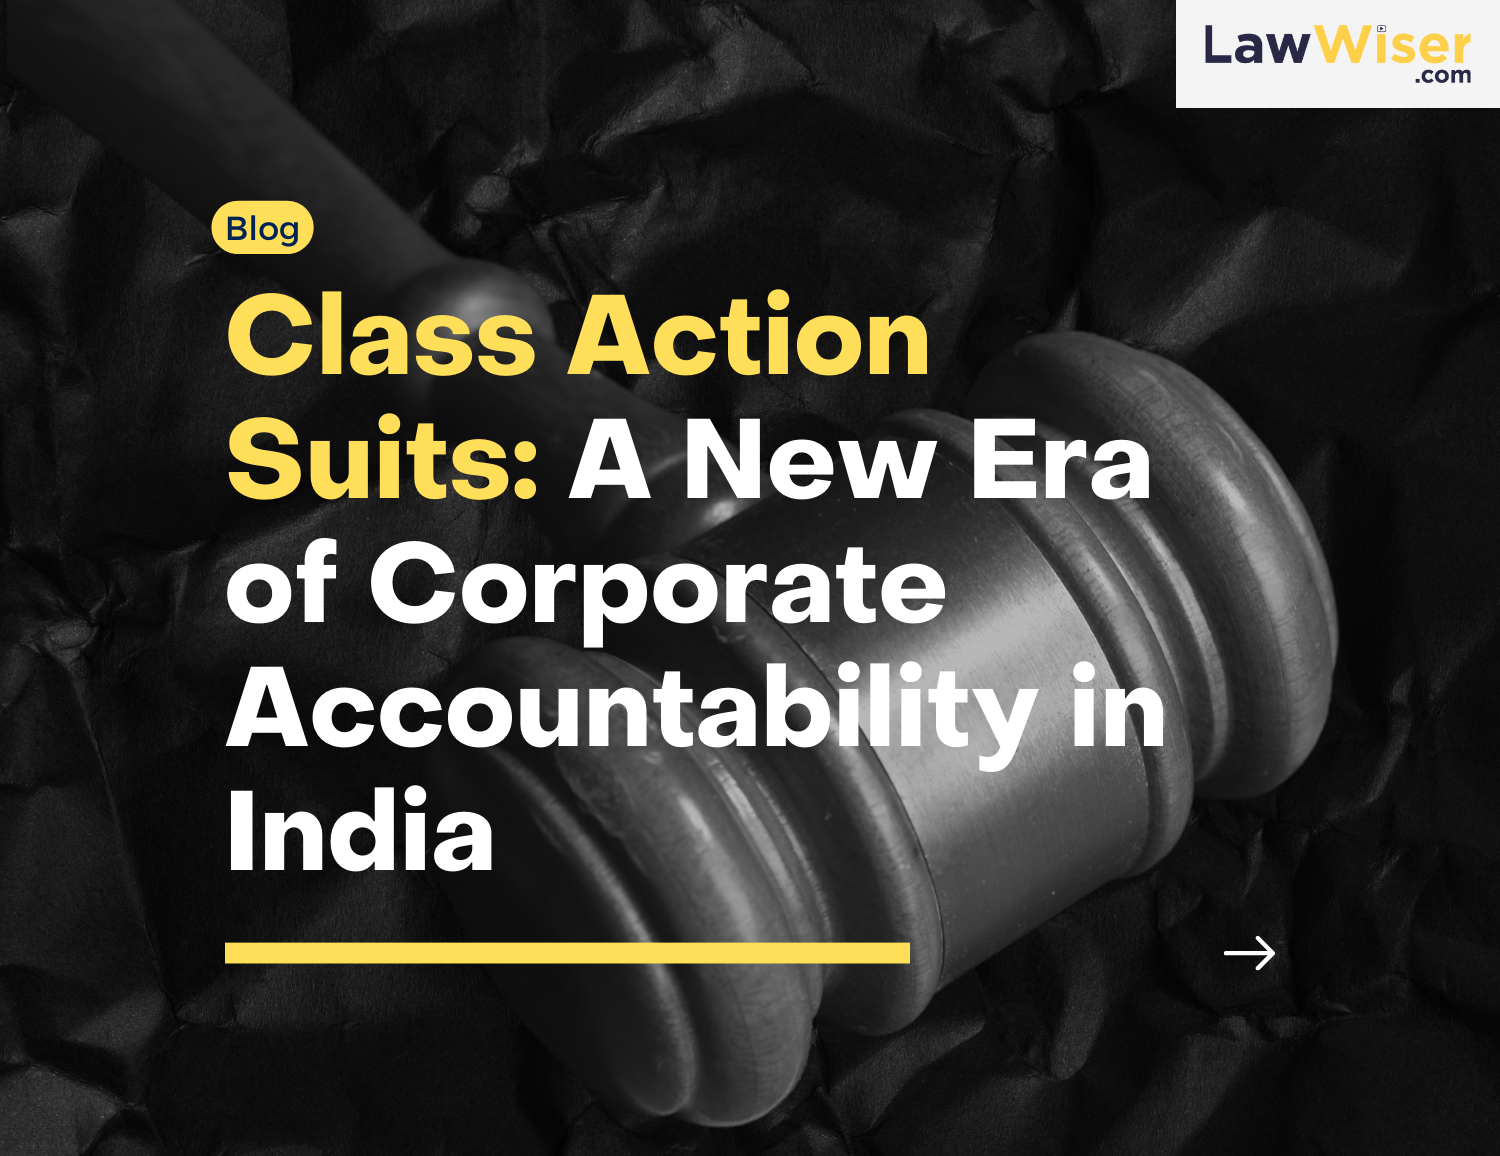 Class Action Suits: A New Era of Corporate Accountability in India